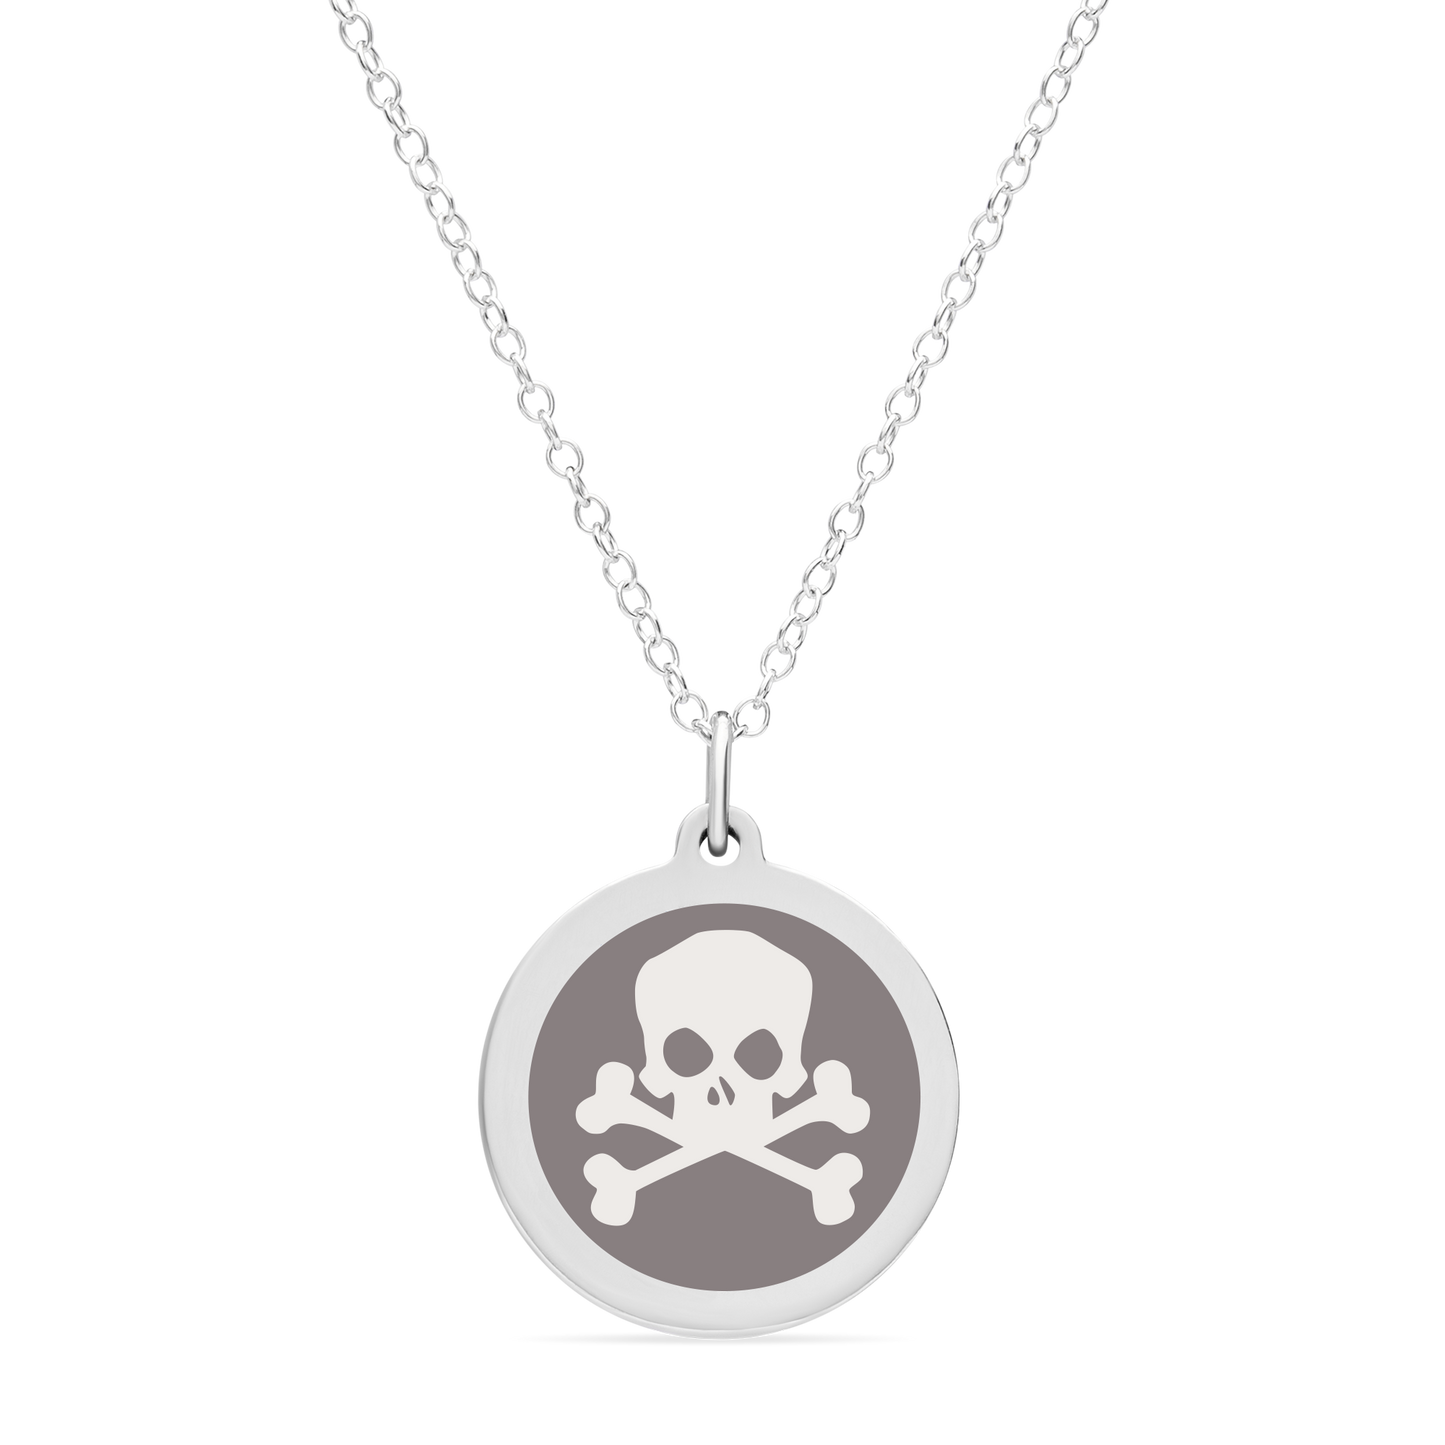 ORIGINAL SKULL CHARM in sterling silver with rhodium plate